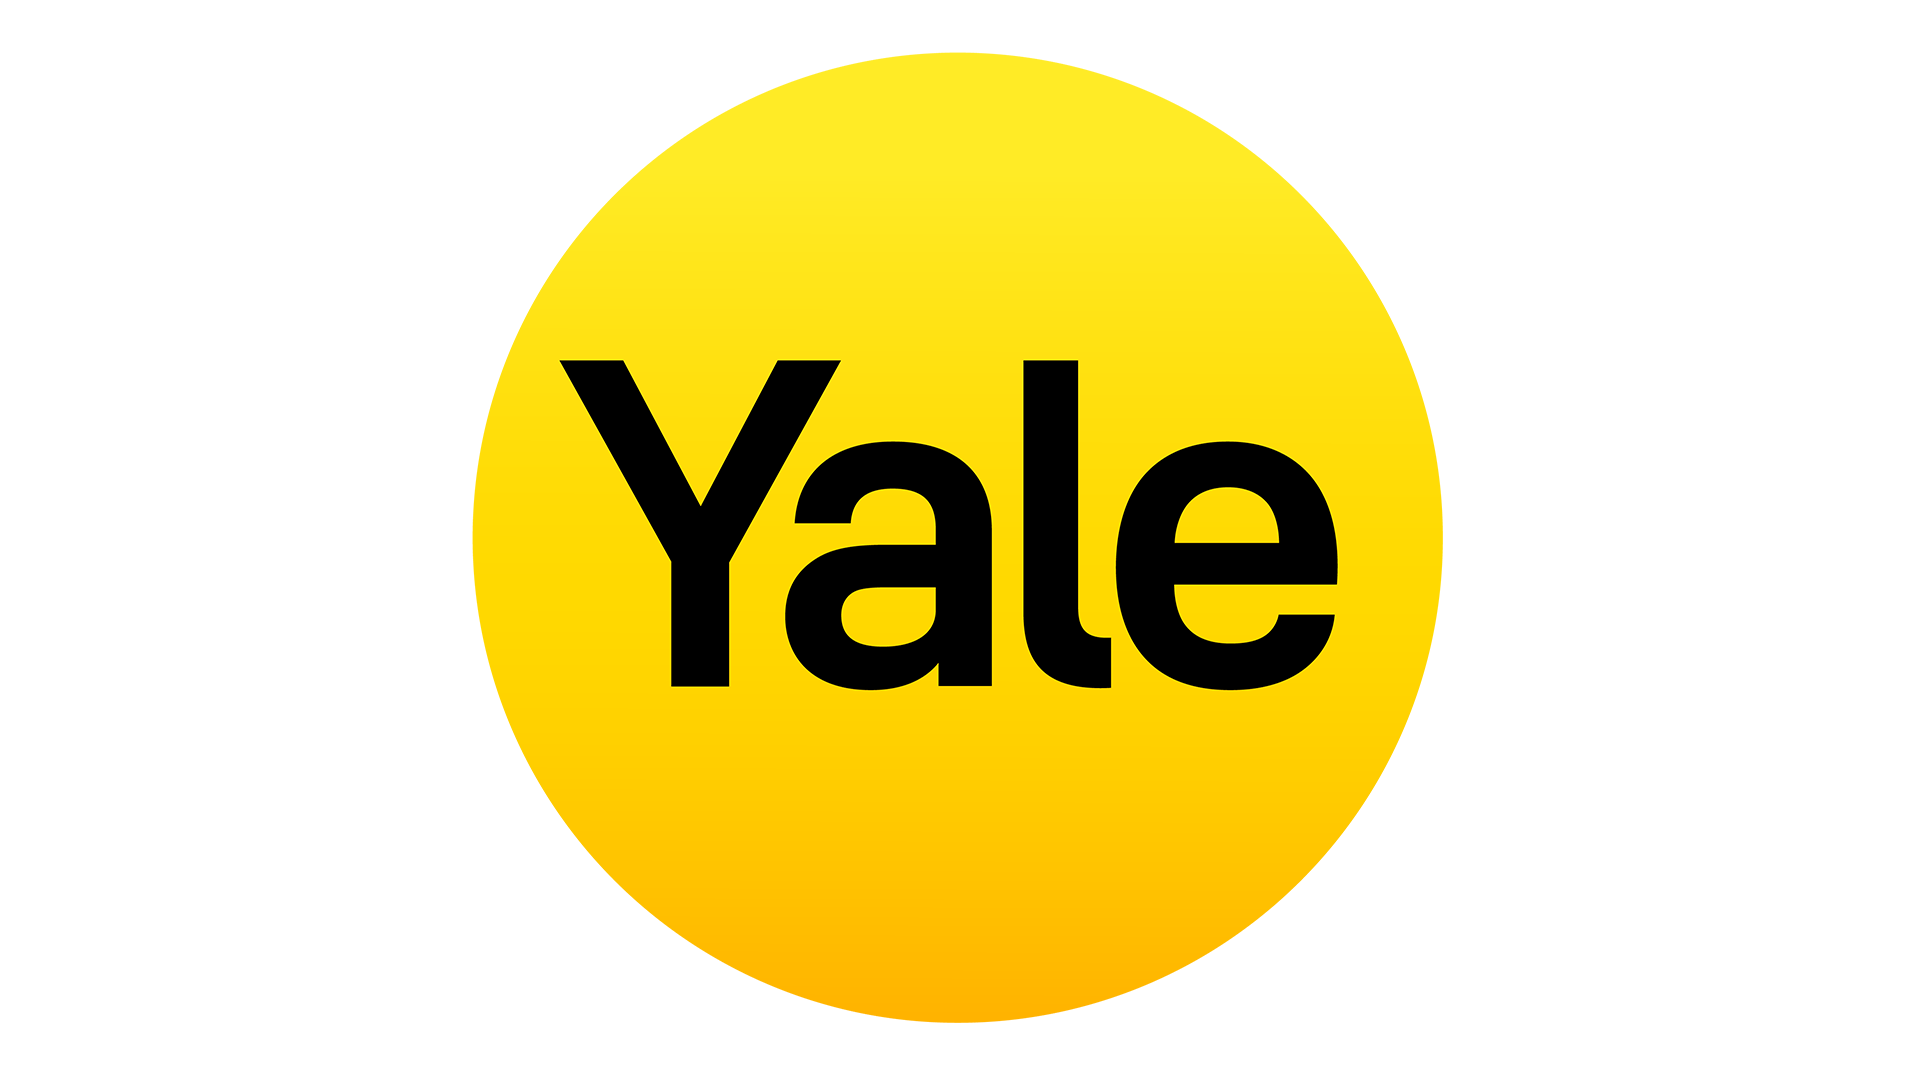 Yale logo - Yale in black text on bright yellow circle.